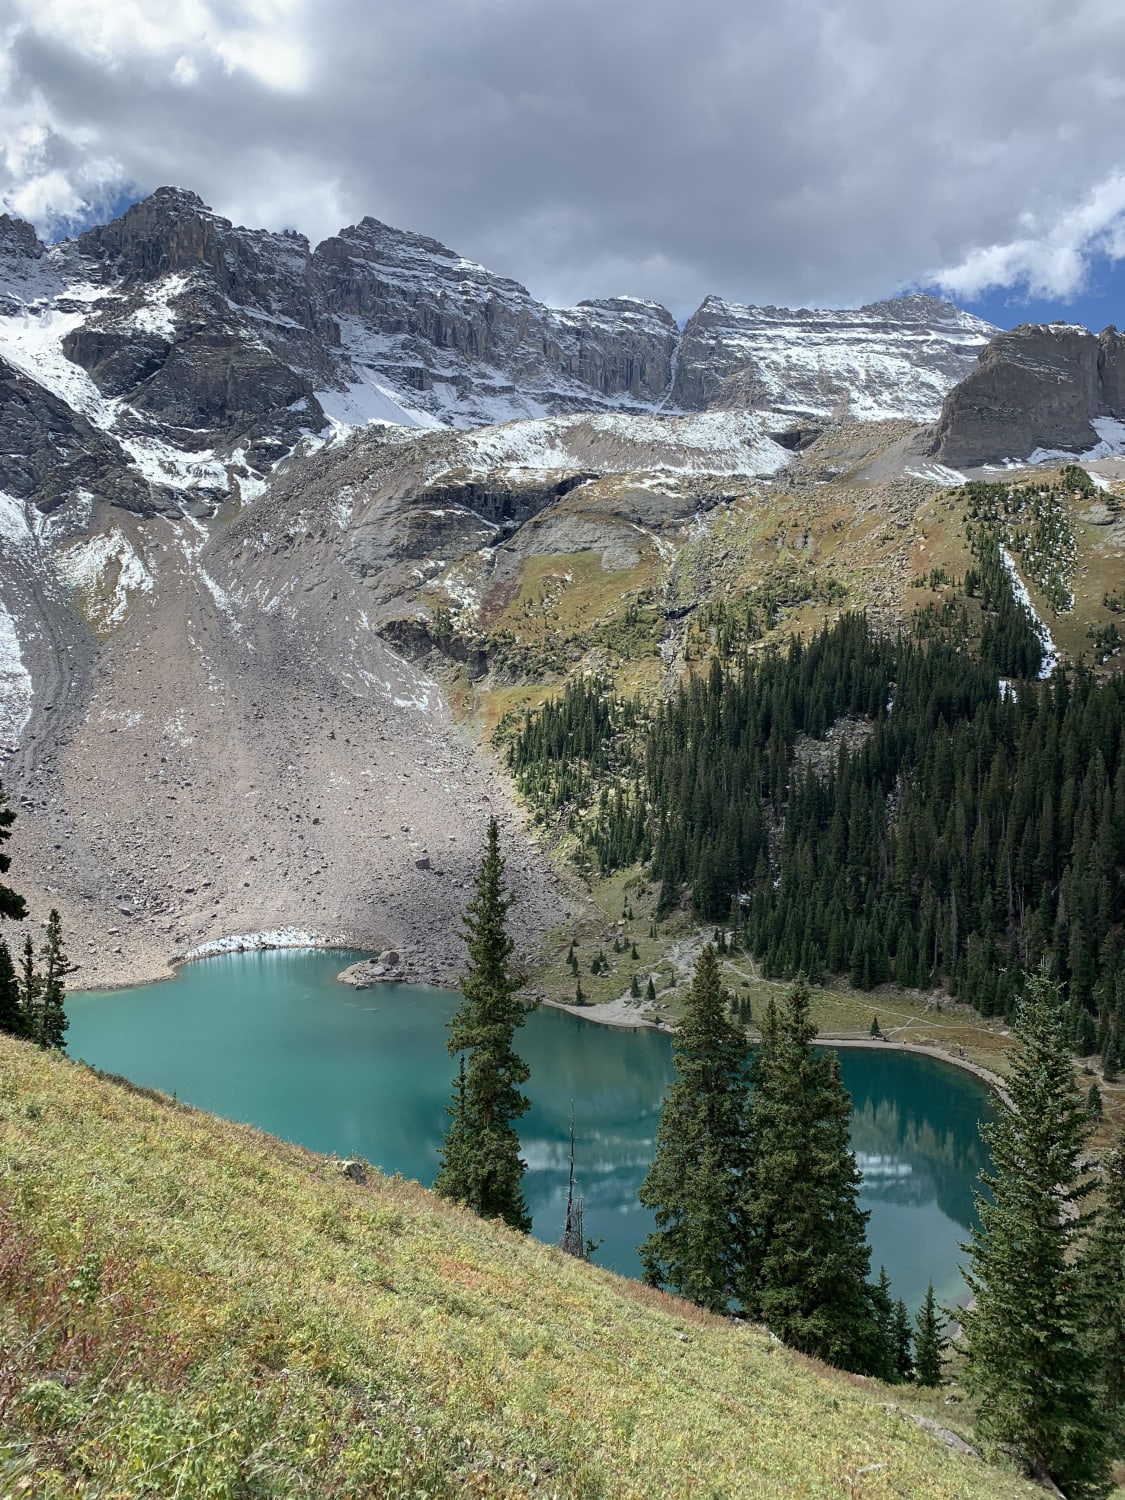 Most gorgeous hike I’ve ever done- to the Blue Lakes (lower lake of the 3 pictured) near Ridgway, Colorado, USA.